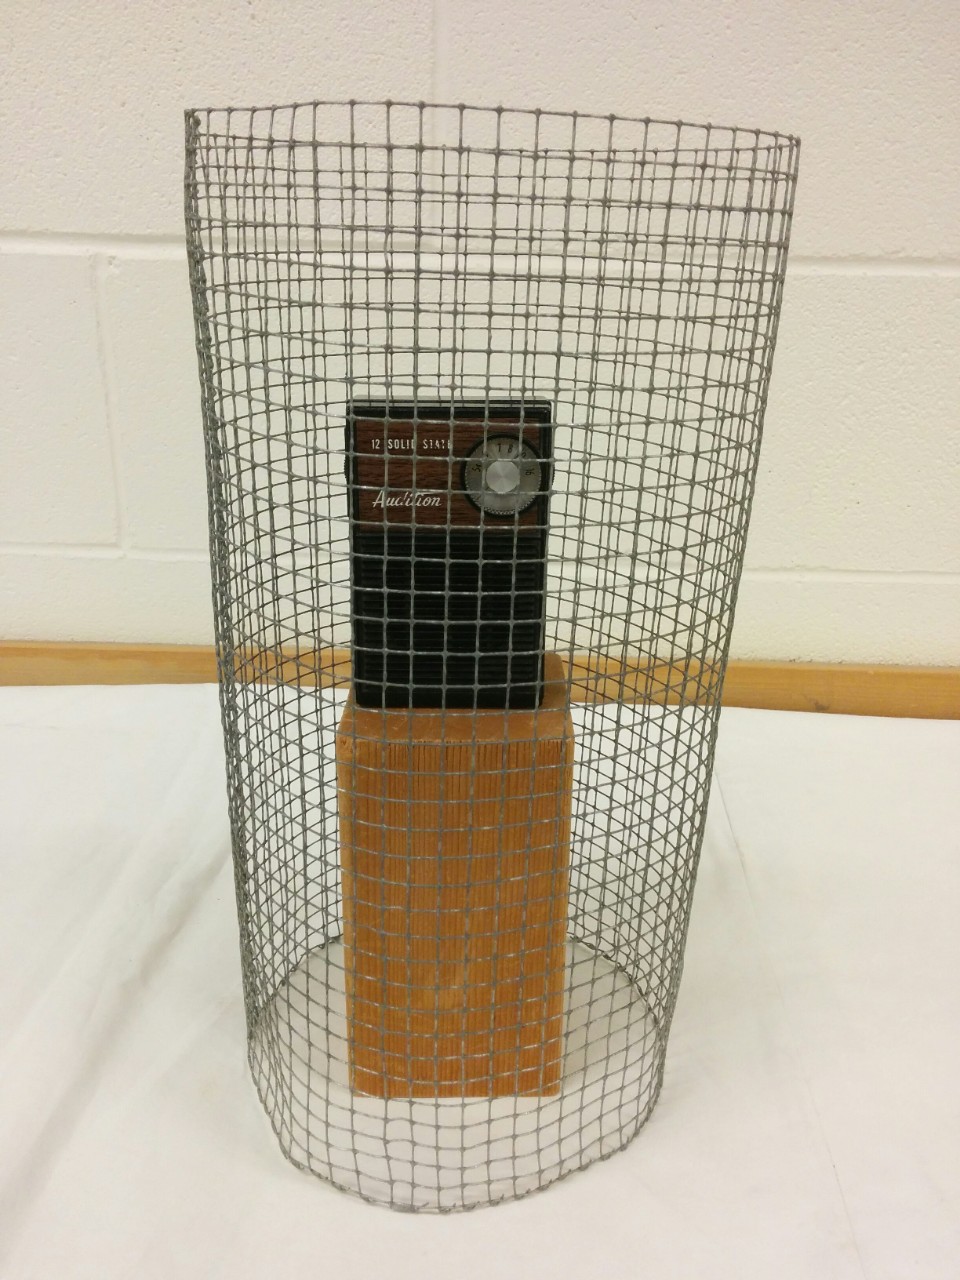 Faraday cage used in the experiments.